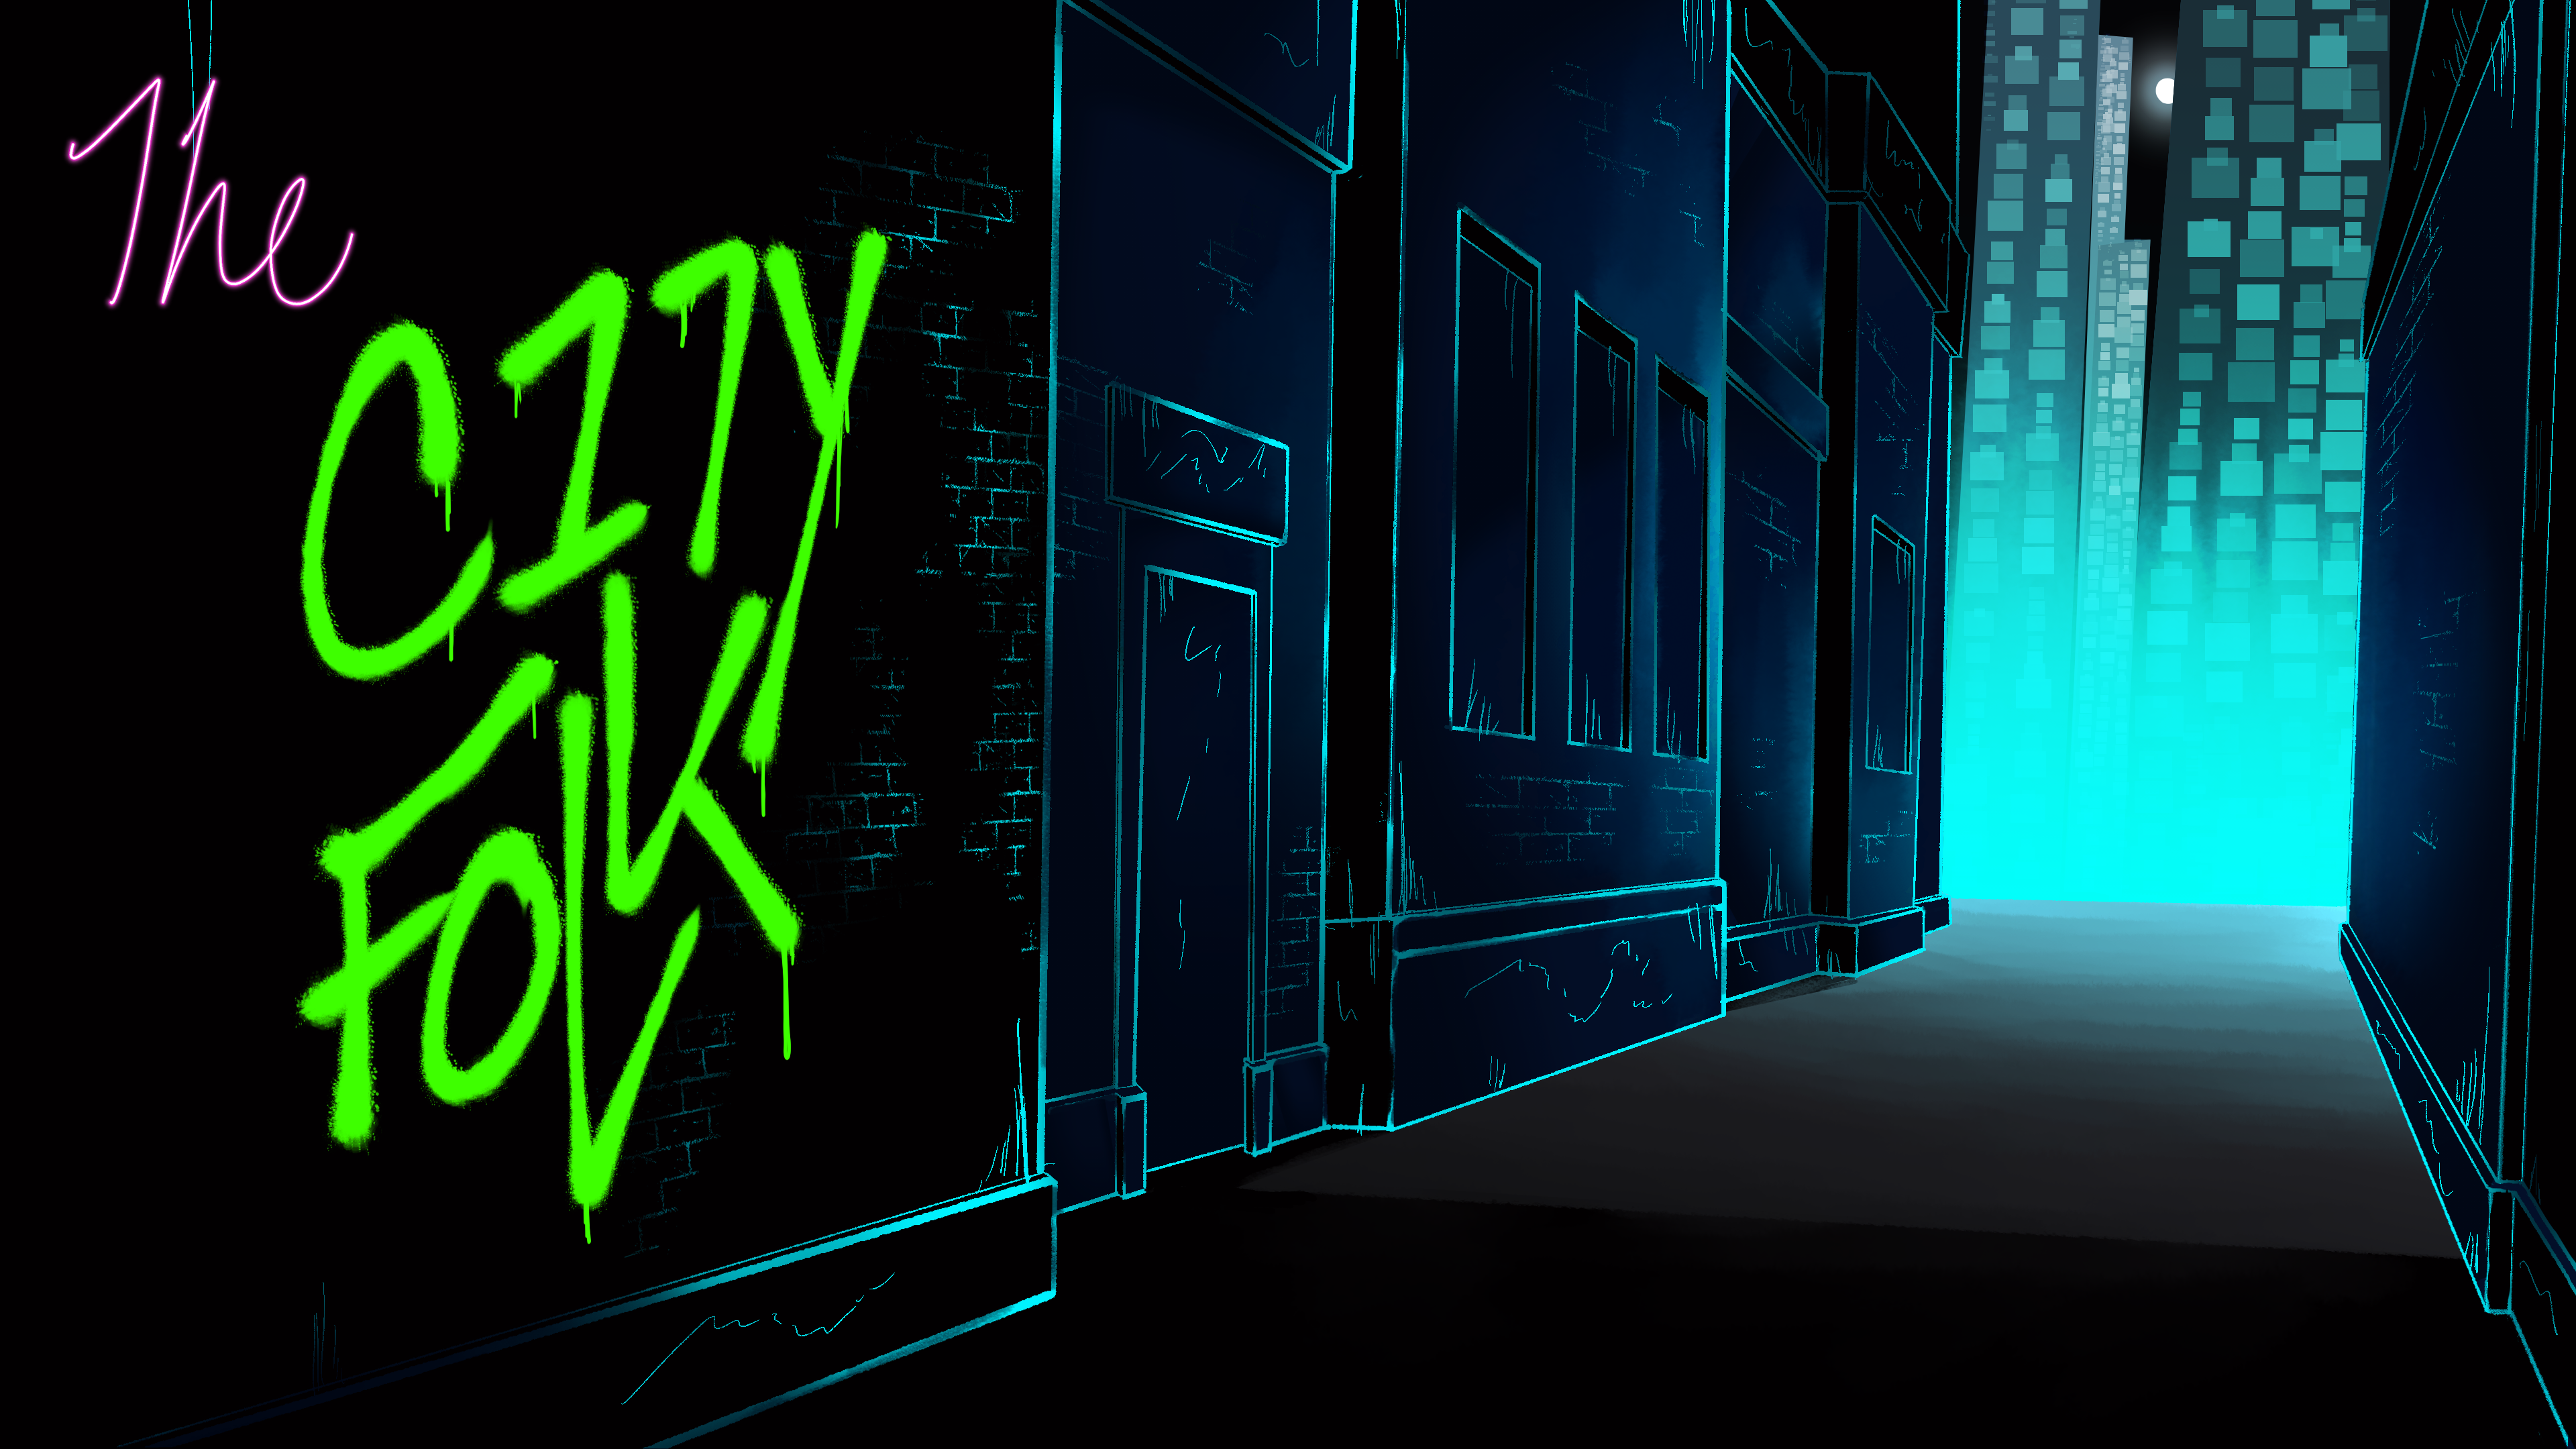 Beware The City Folk (Prototype not game or demo))